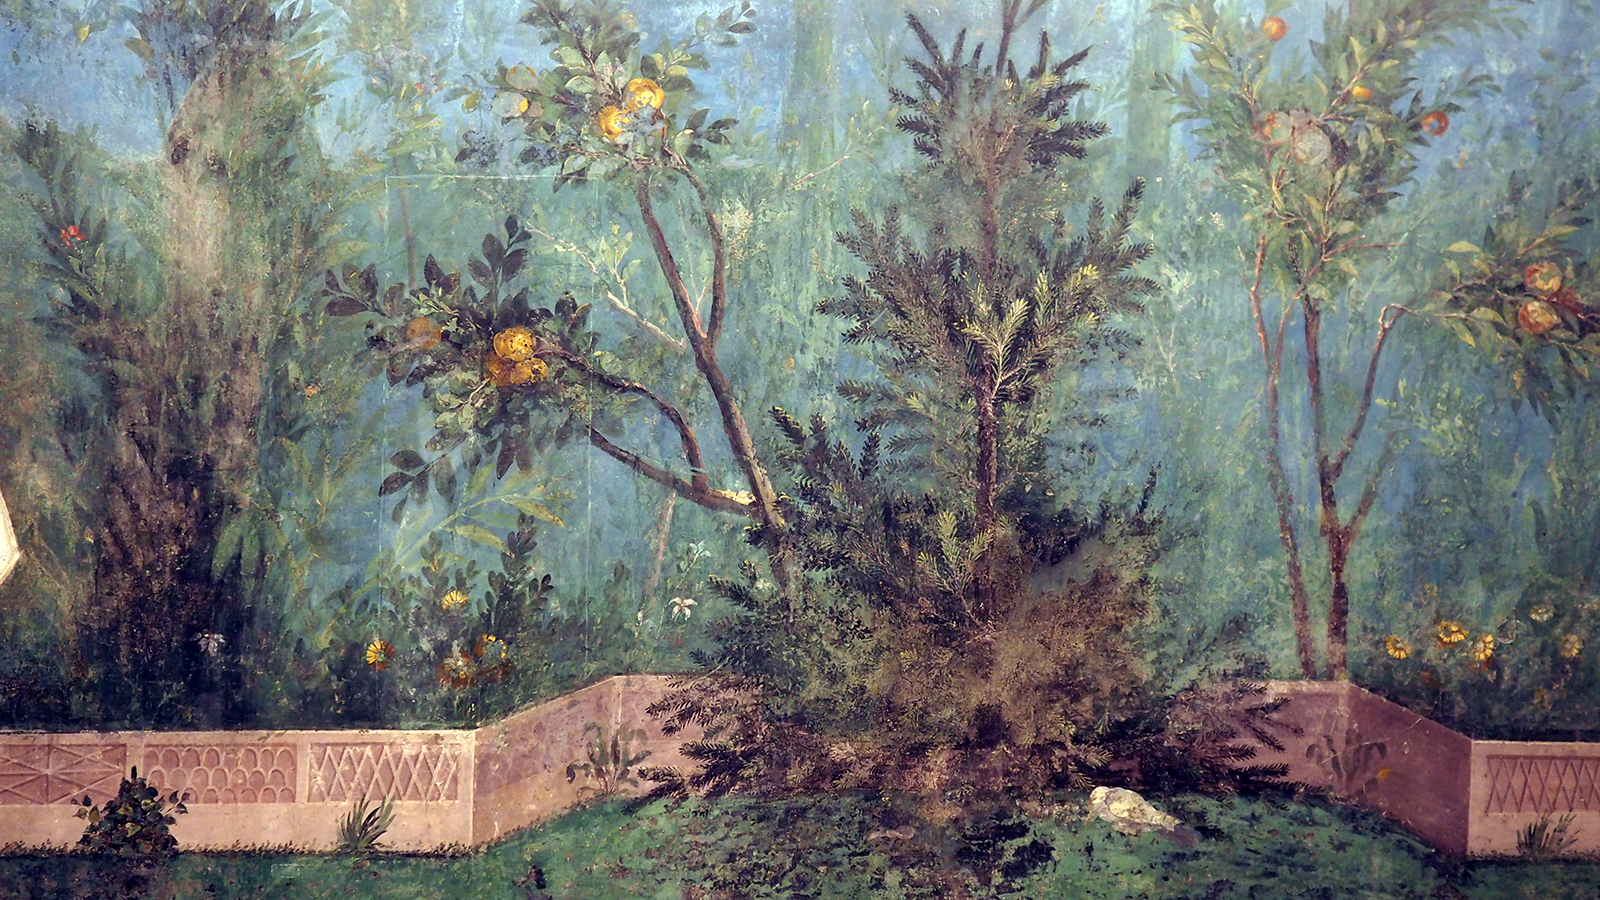 Color photograph of an ancient roman wall mural depicting fruit-bearing plants and trees and a small fence running along the bottom